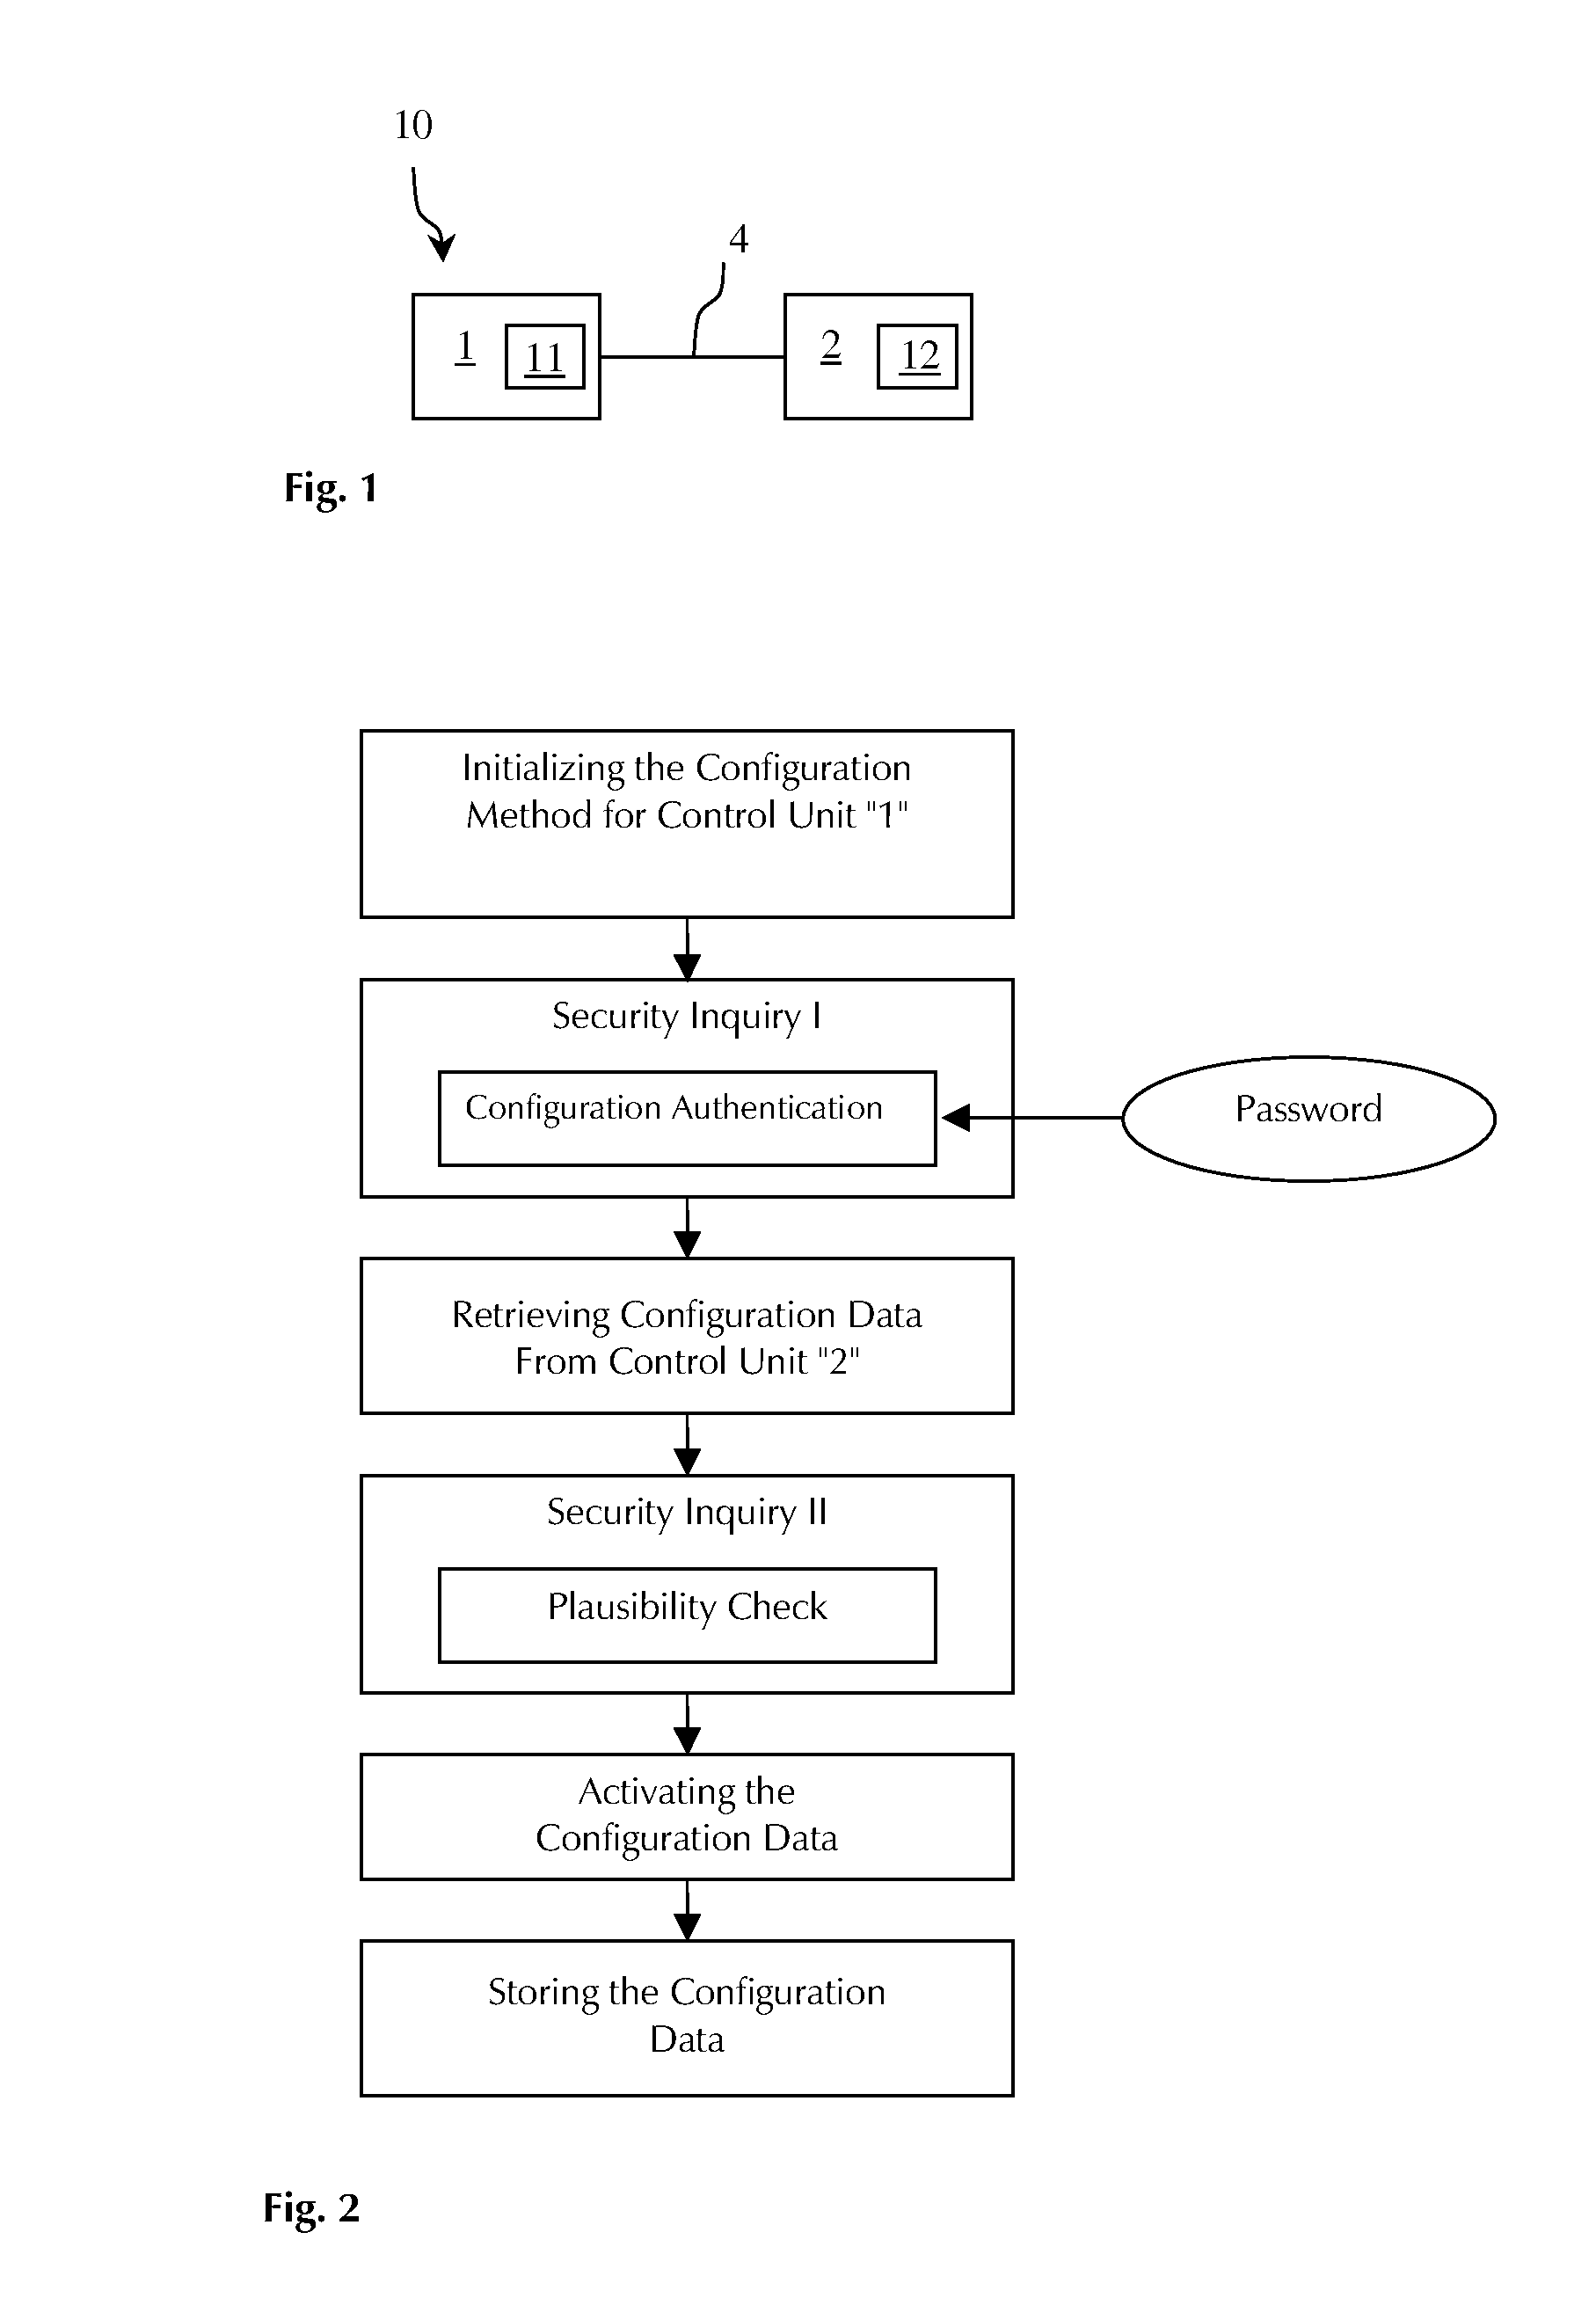 Configuration method for control units